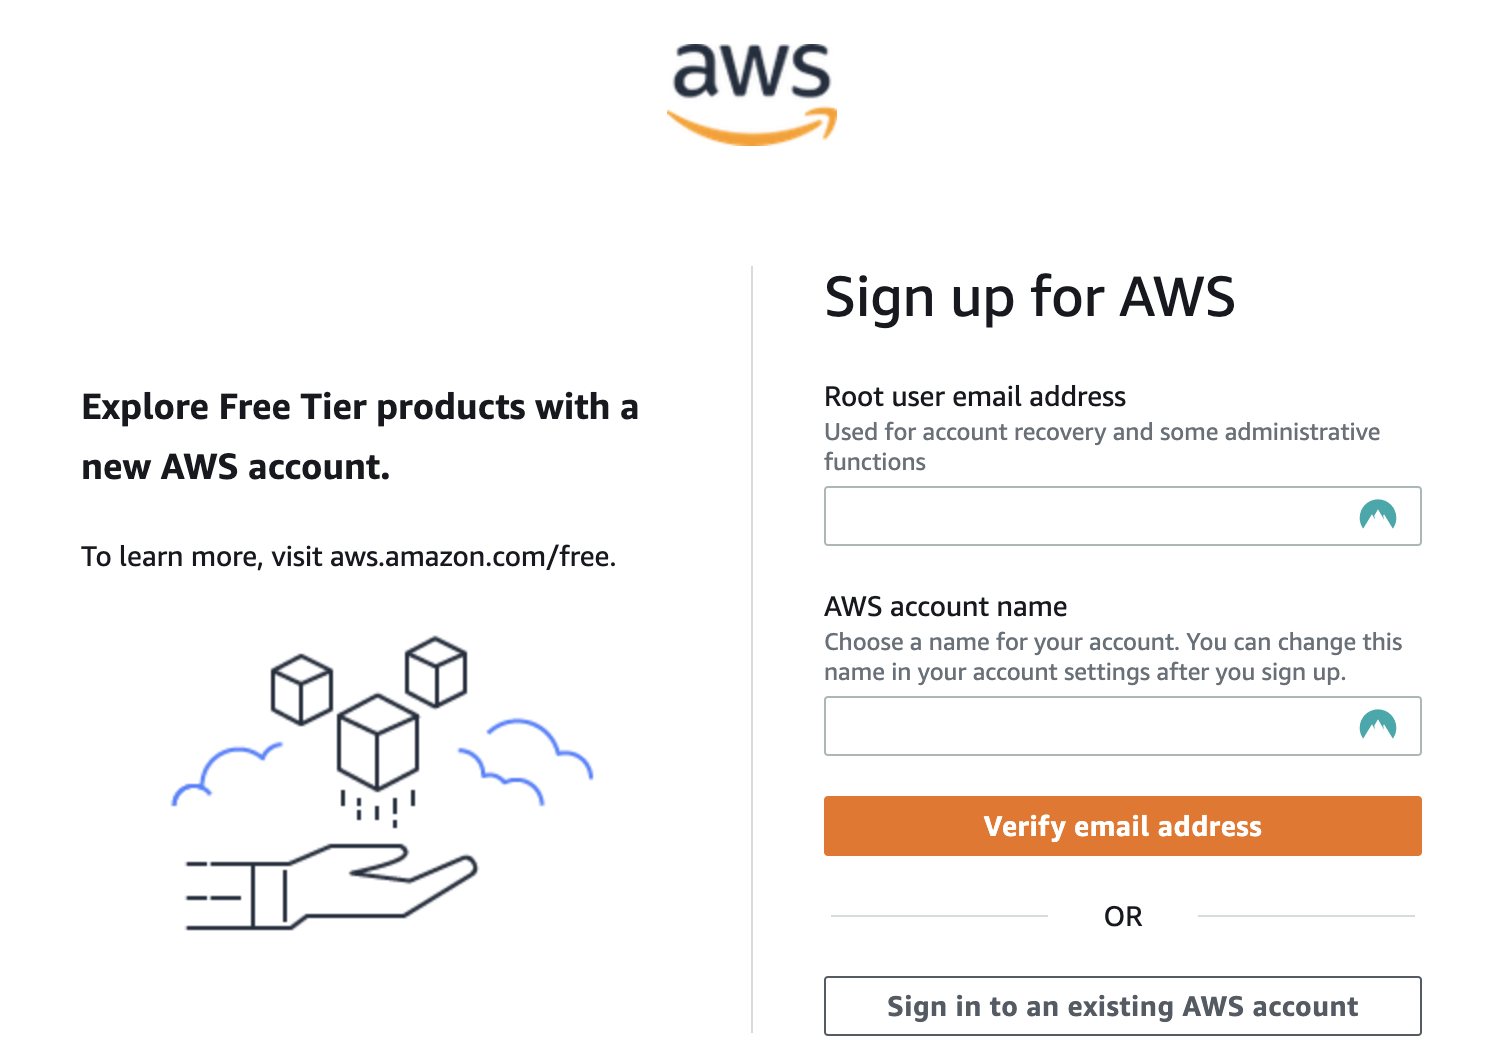 The AWS signup form